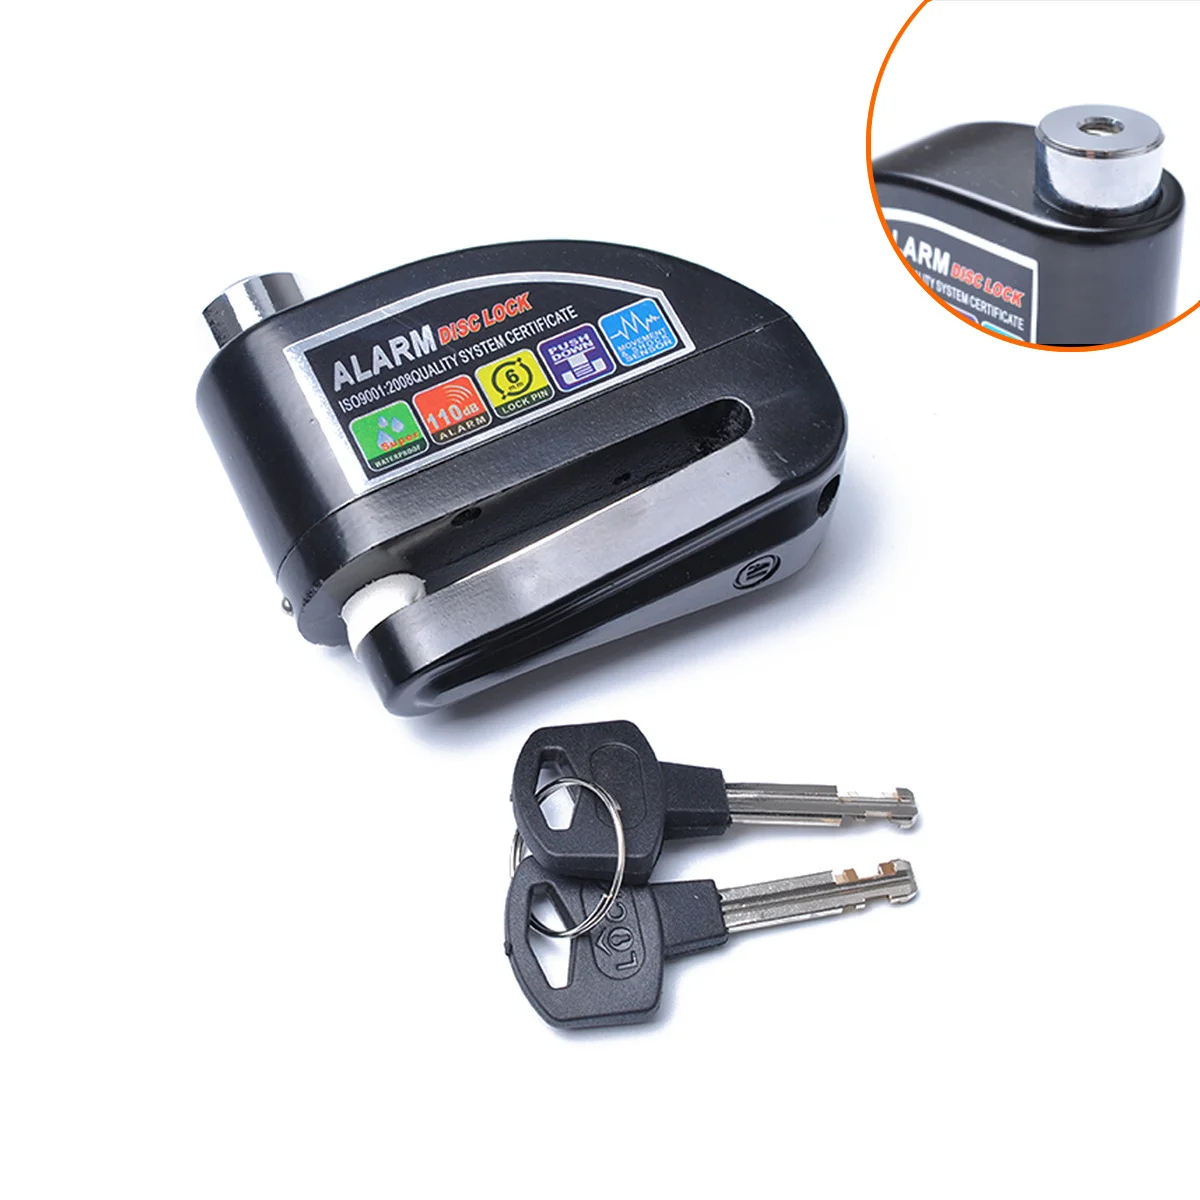 
The motorcycle disc brake lock replaces the U lock for anti-theft alarm 